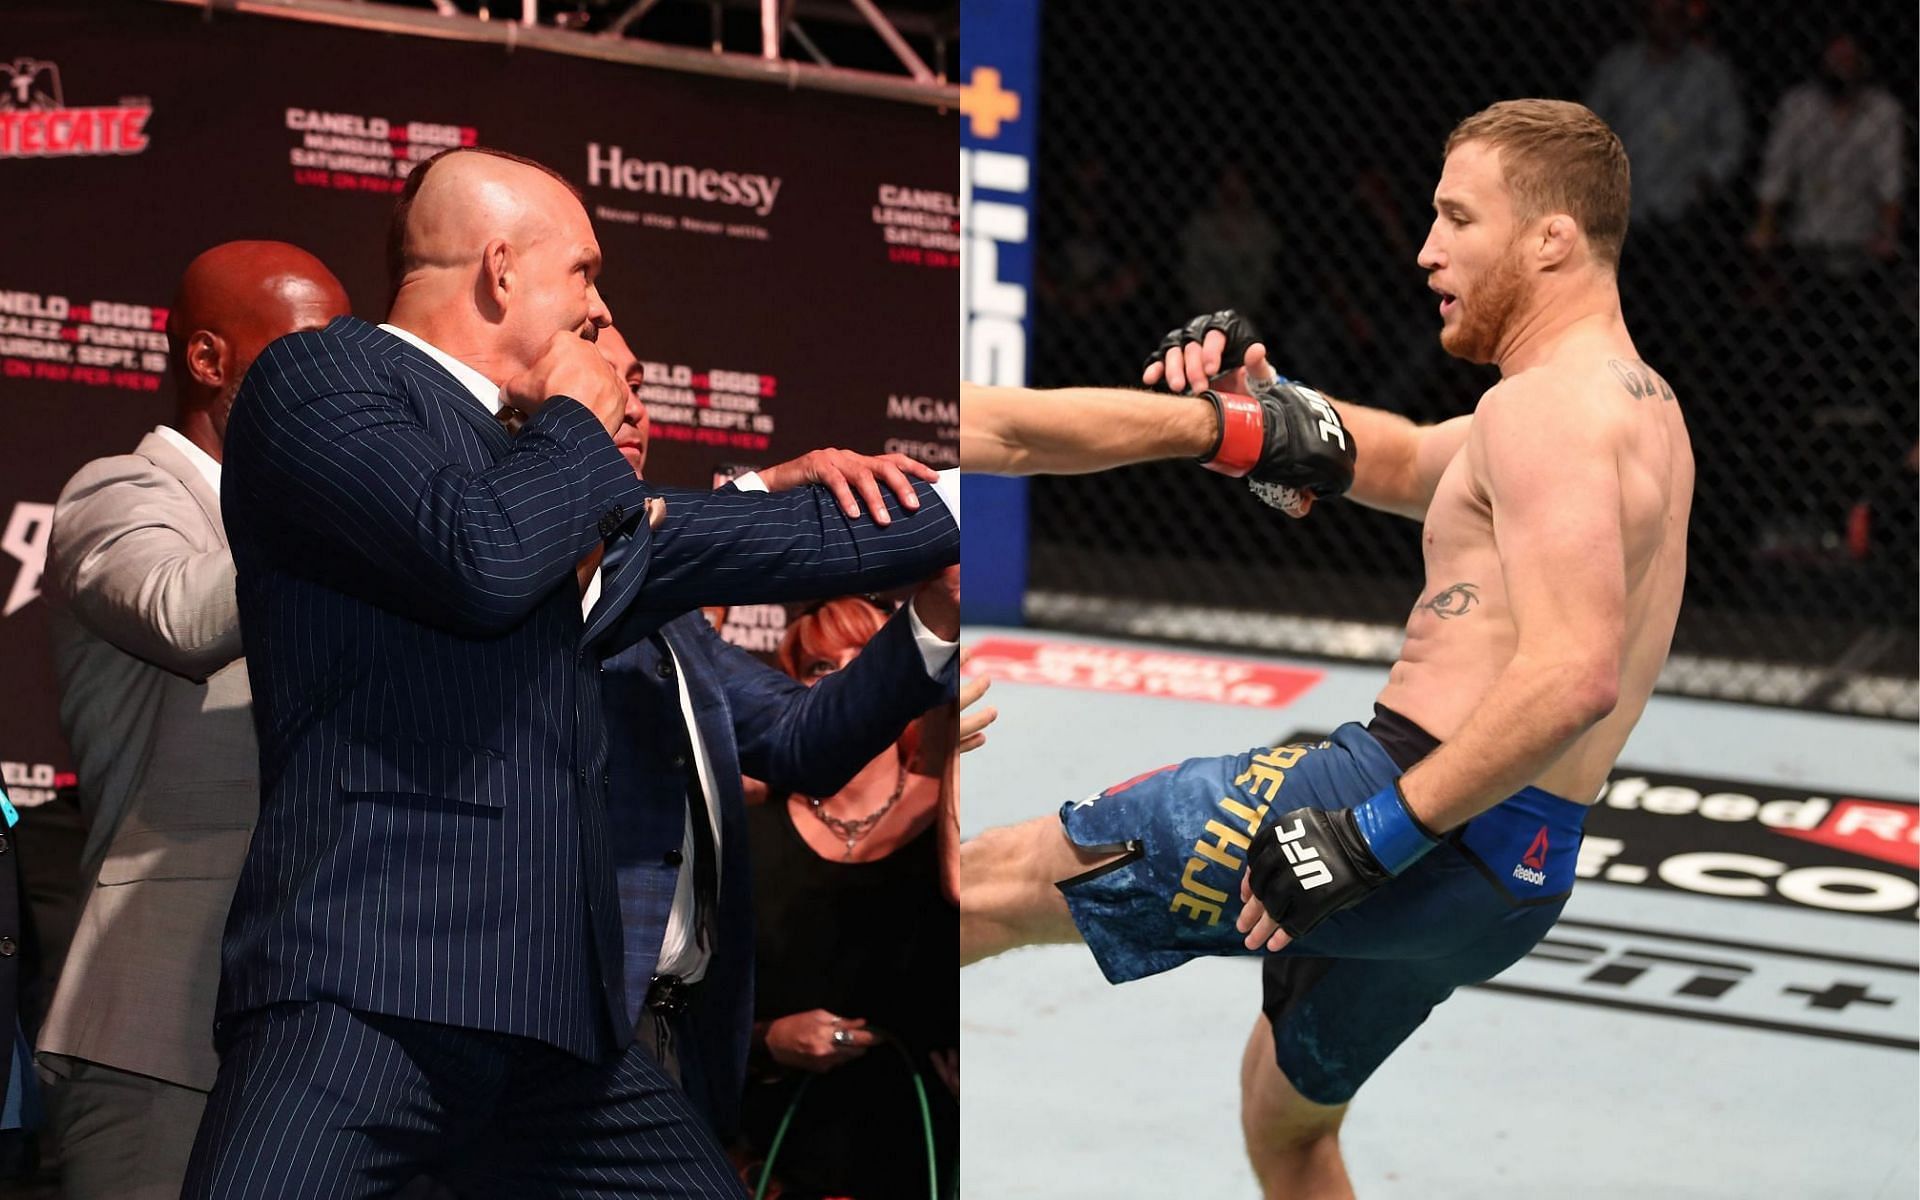 Chael Sonnen has spoken about the wrestling prowess of both Chuck Liddell and Justin Gaethje